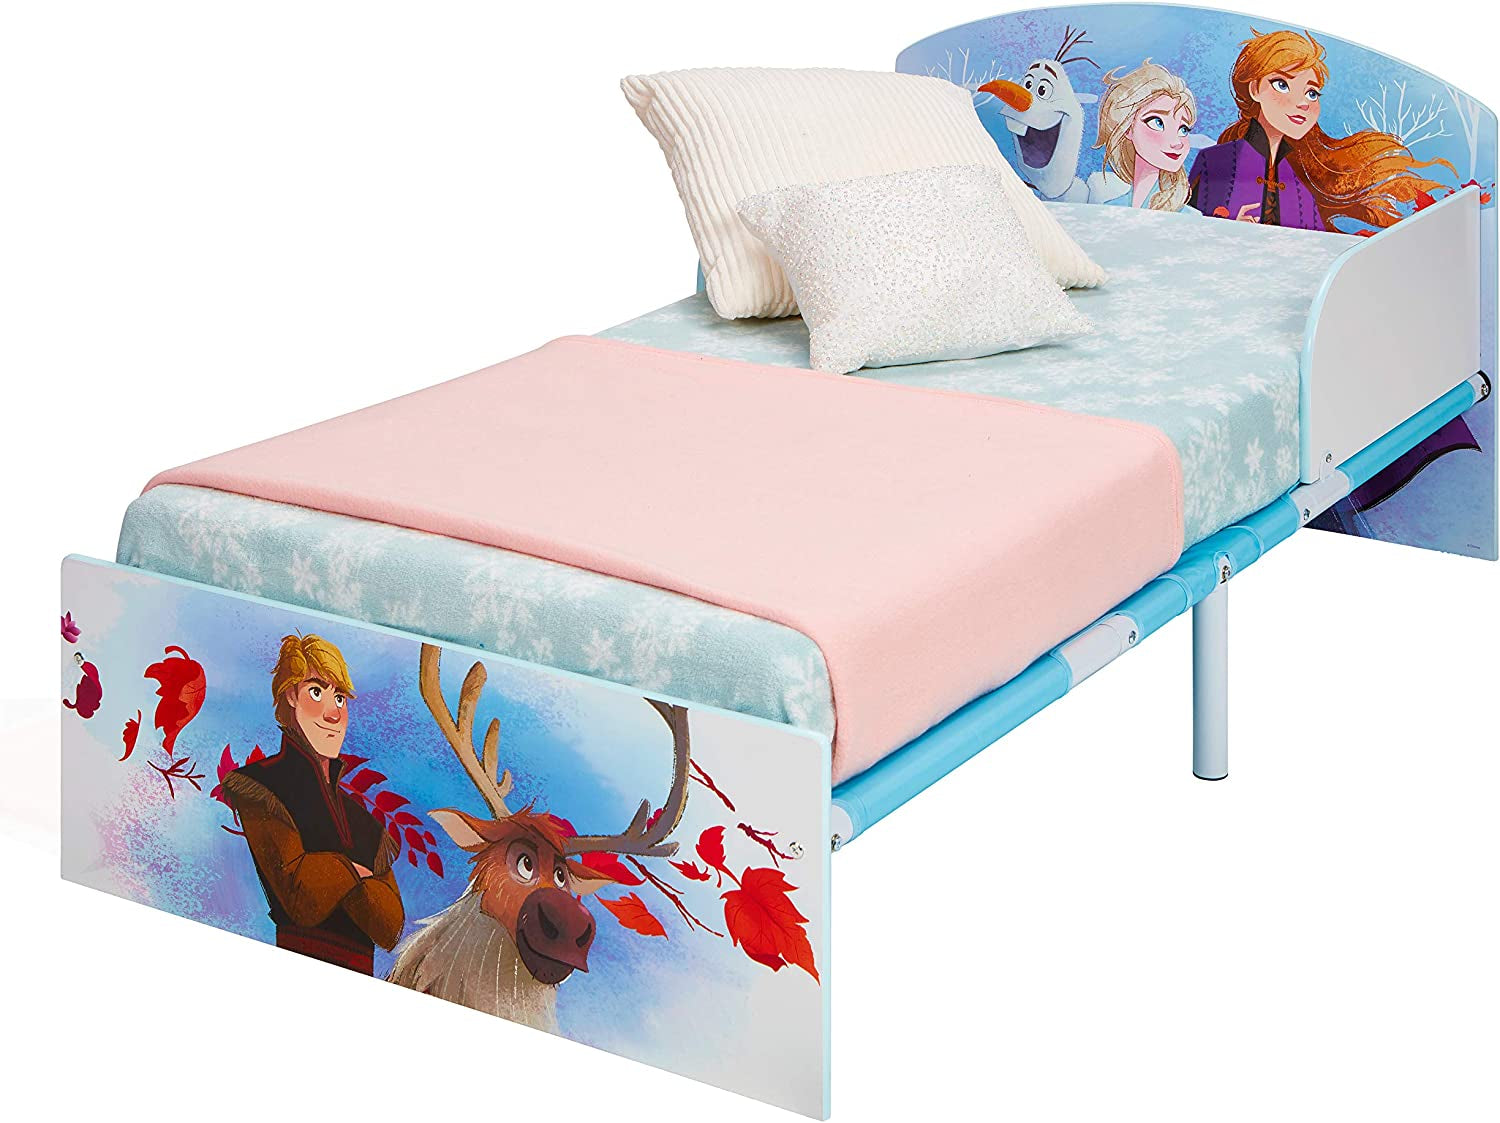 Frozen Kids Toddler Bed by Hellohome, Single